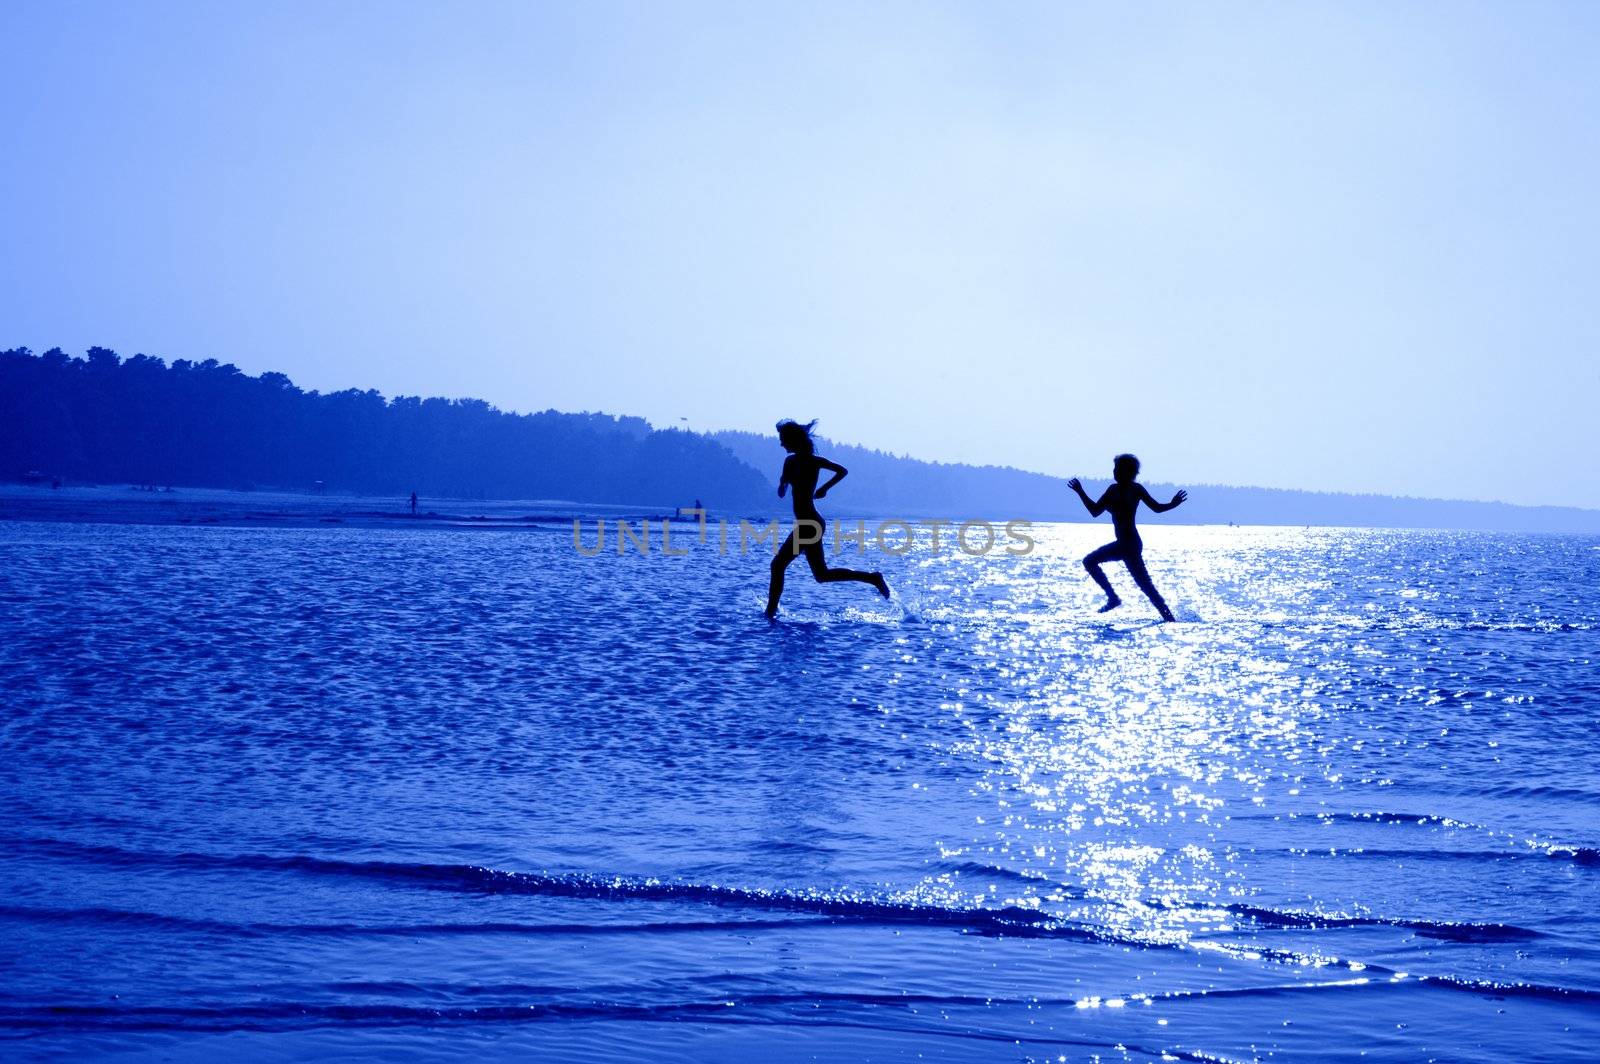 silhouette image of two running girls in water